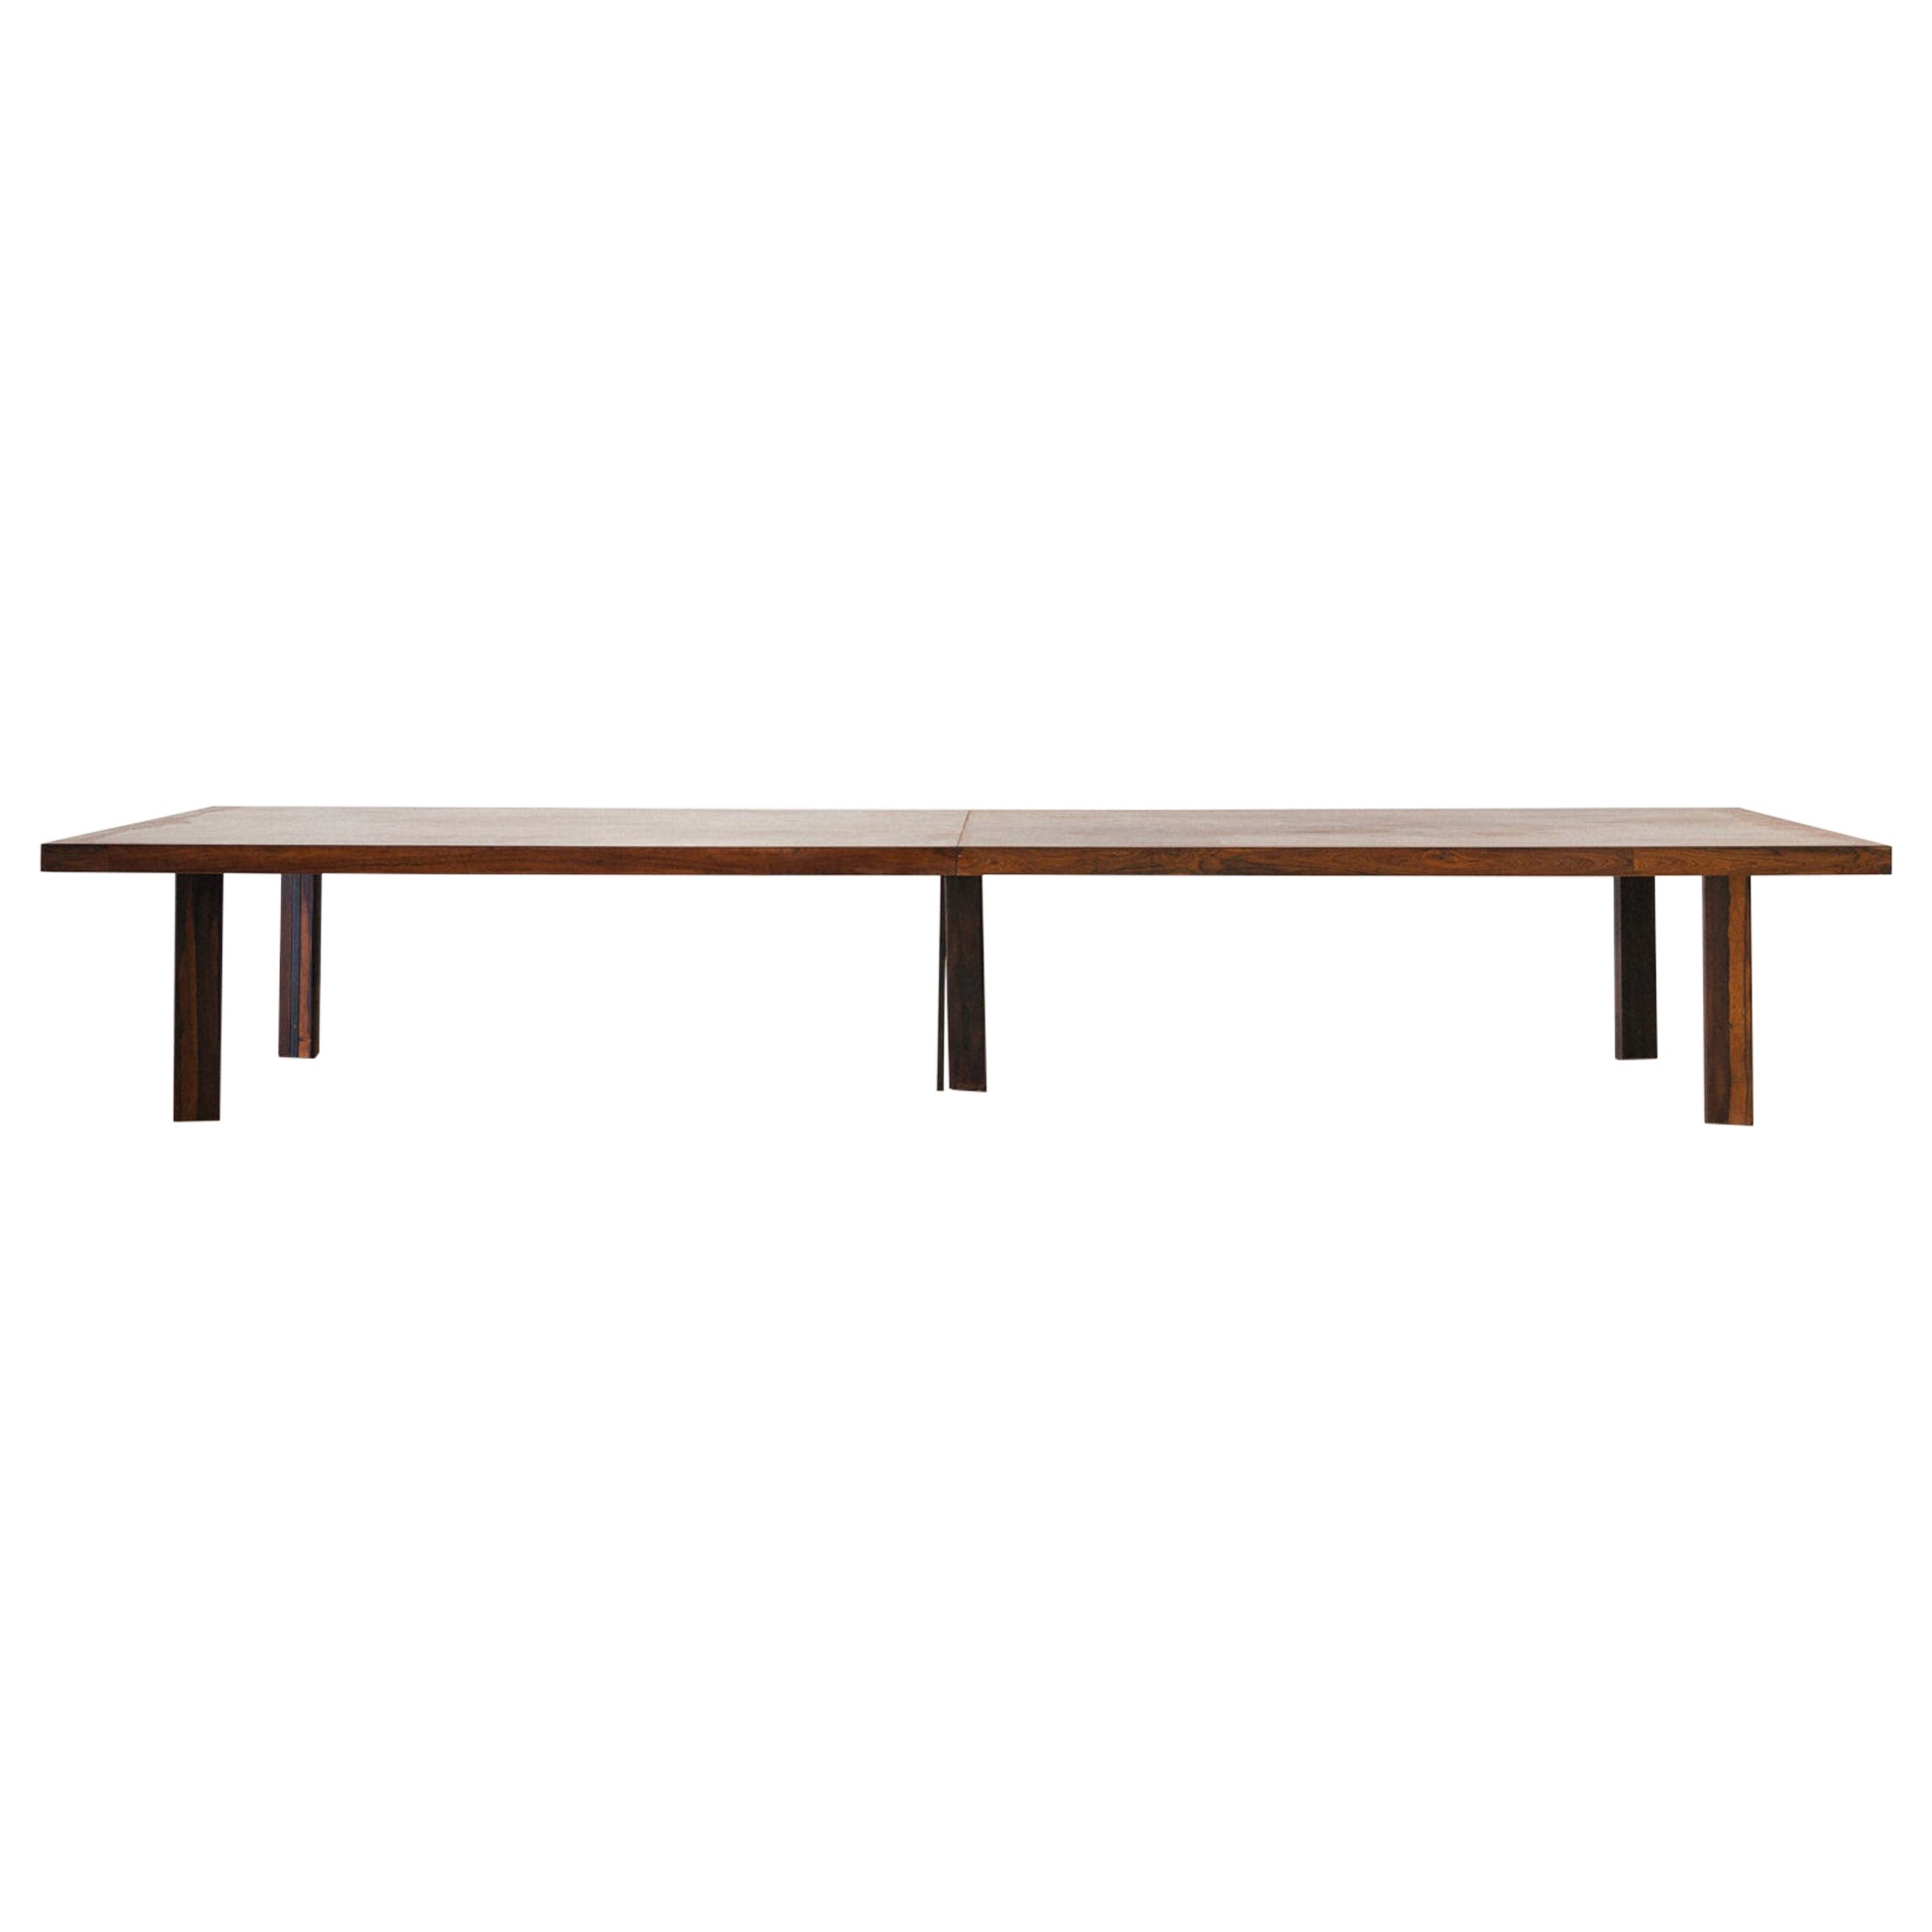 Brazilian Midcentury Dining Table in Rosewood, Unknown Designer, 1960s For Sale